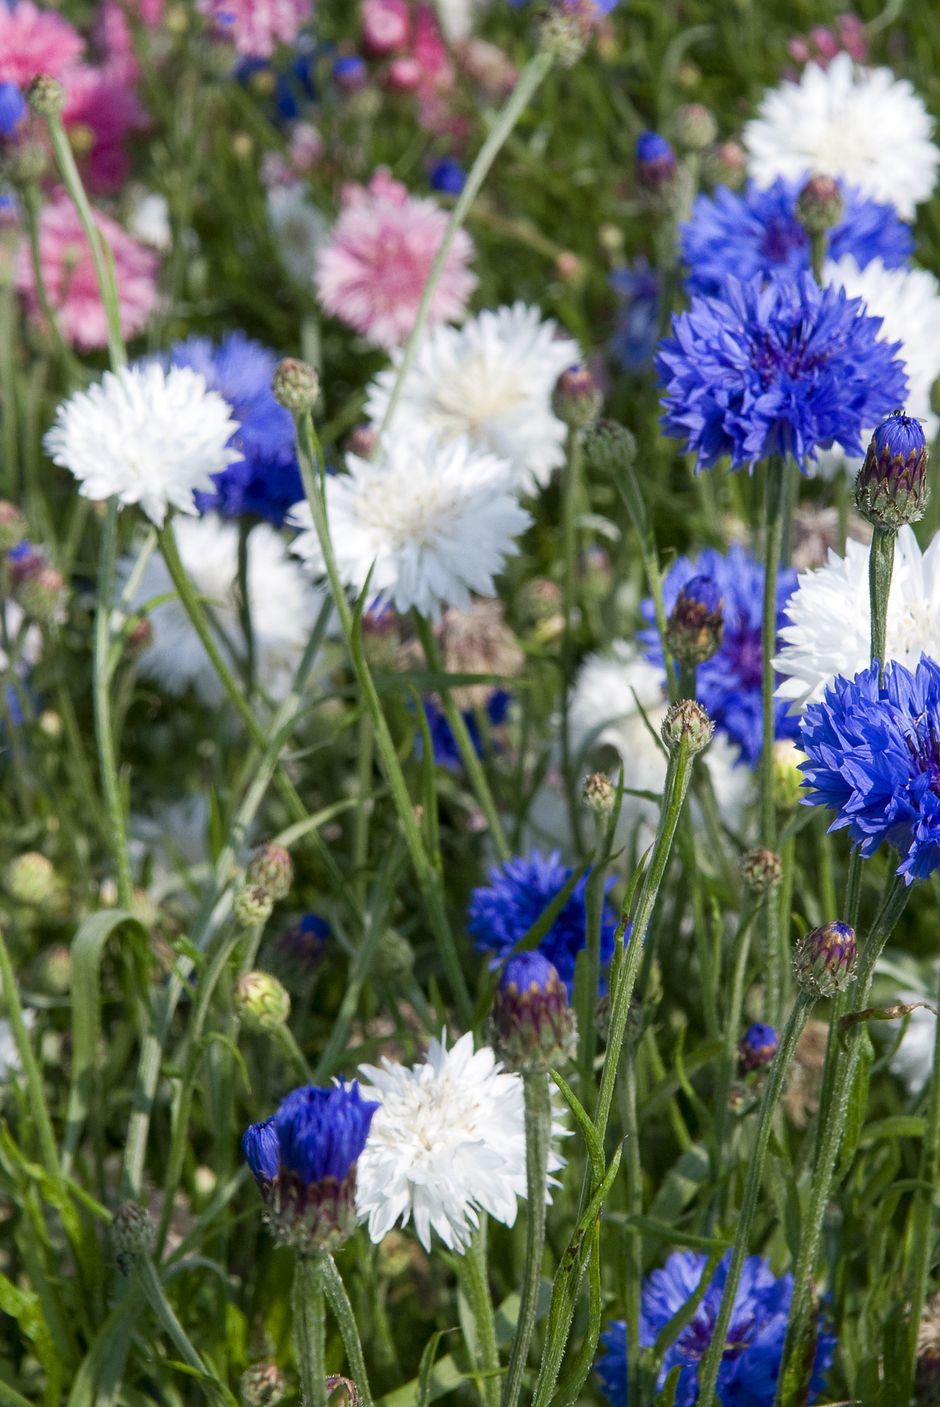 30 Best Spring Flowers - Popular Flowers to Plant in Spring